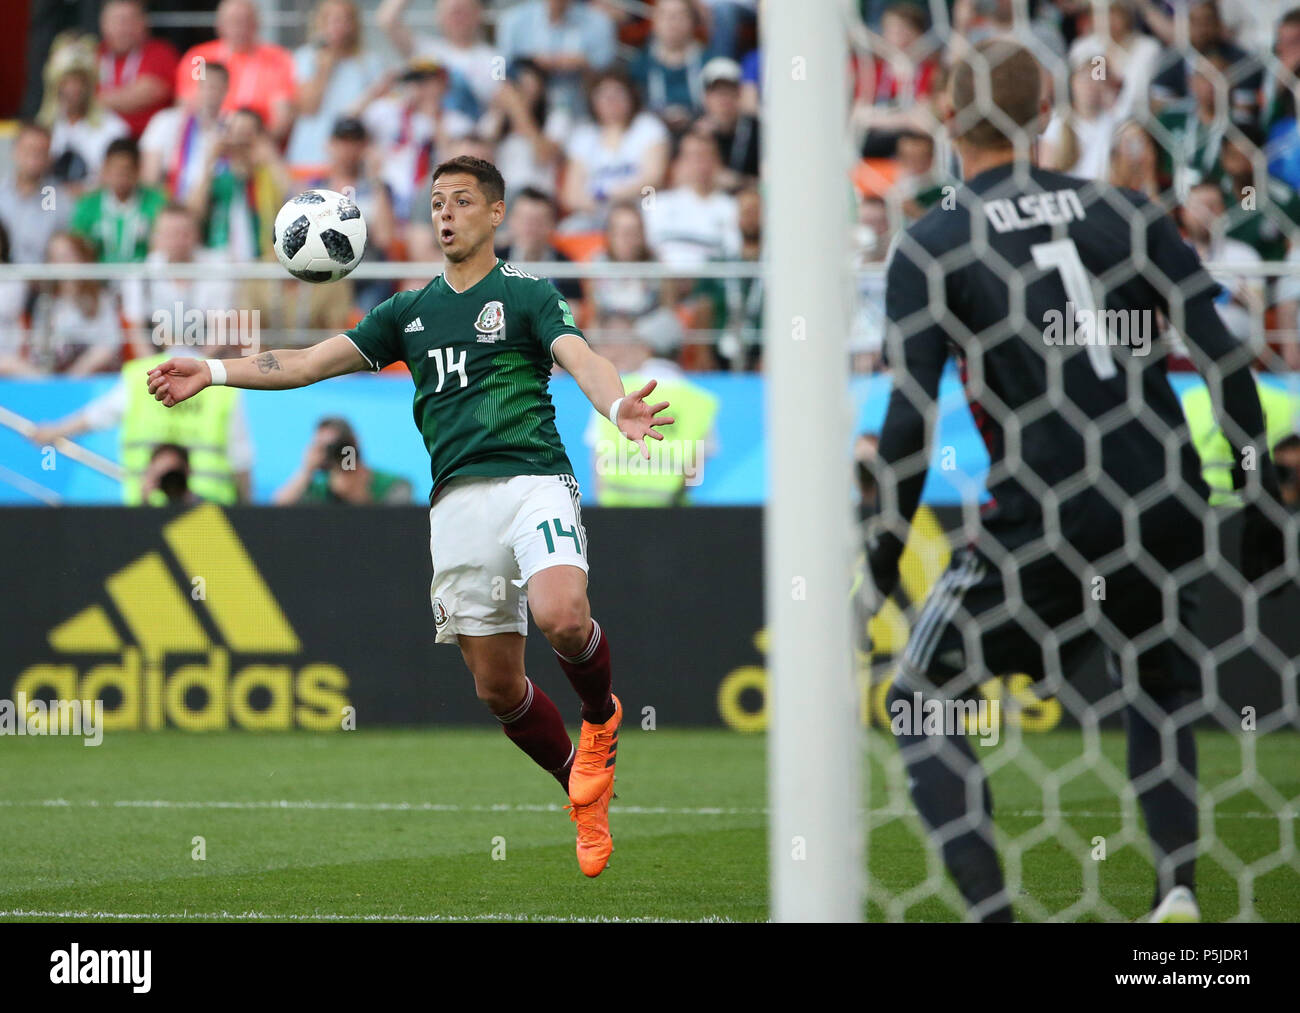 Yekaterinburg, Russia. 27th June, 2018. Javier Hernandez (L) of Mexico controls the ball during the 2018 FIFA World Cup Group F match between Mexico and Sweden in Yekaterinburg, Russia, June 27, 2018. Sweden won 3-0. Mexico and Sweden advanced to the round of 16. Credit: Li Ming/Xinhua/Alamy Live News Stock Photo